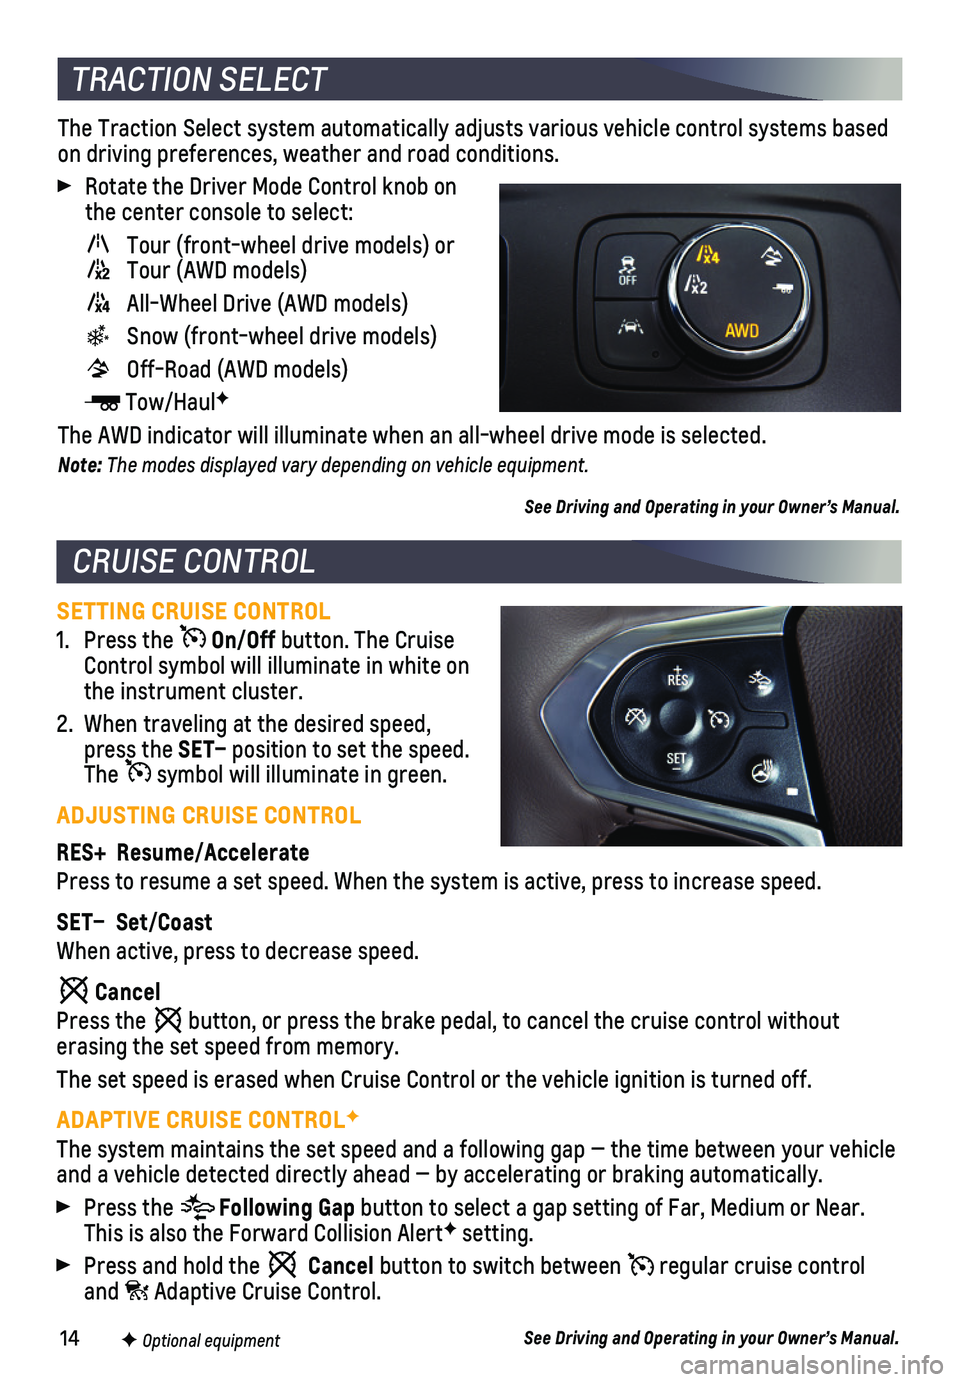 CHEVROLET TRAVERSE 2018  Get To Know Guide 14
SETTING CRUISE CONTROL
1. Press the  On/Off button. The Cruise Control symbol will illuminate in white on the instrument cluster.
2. When traveling at the desired speed, press the SET–  position 